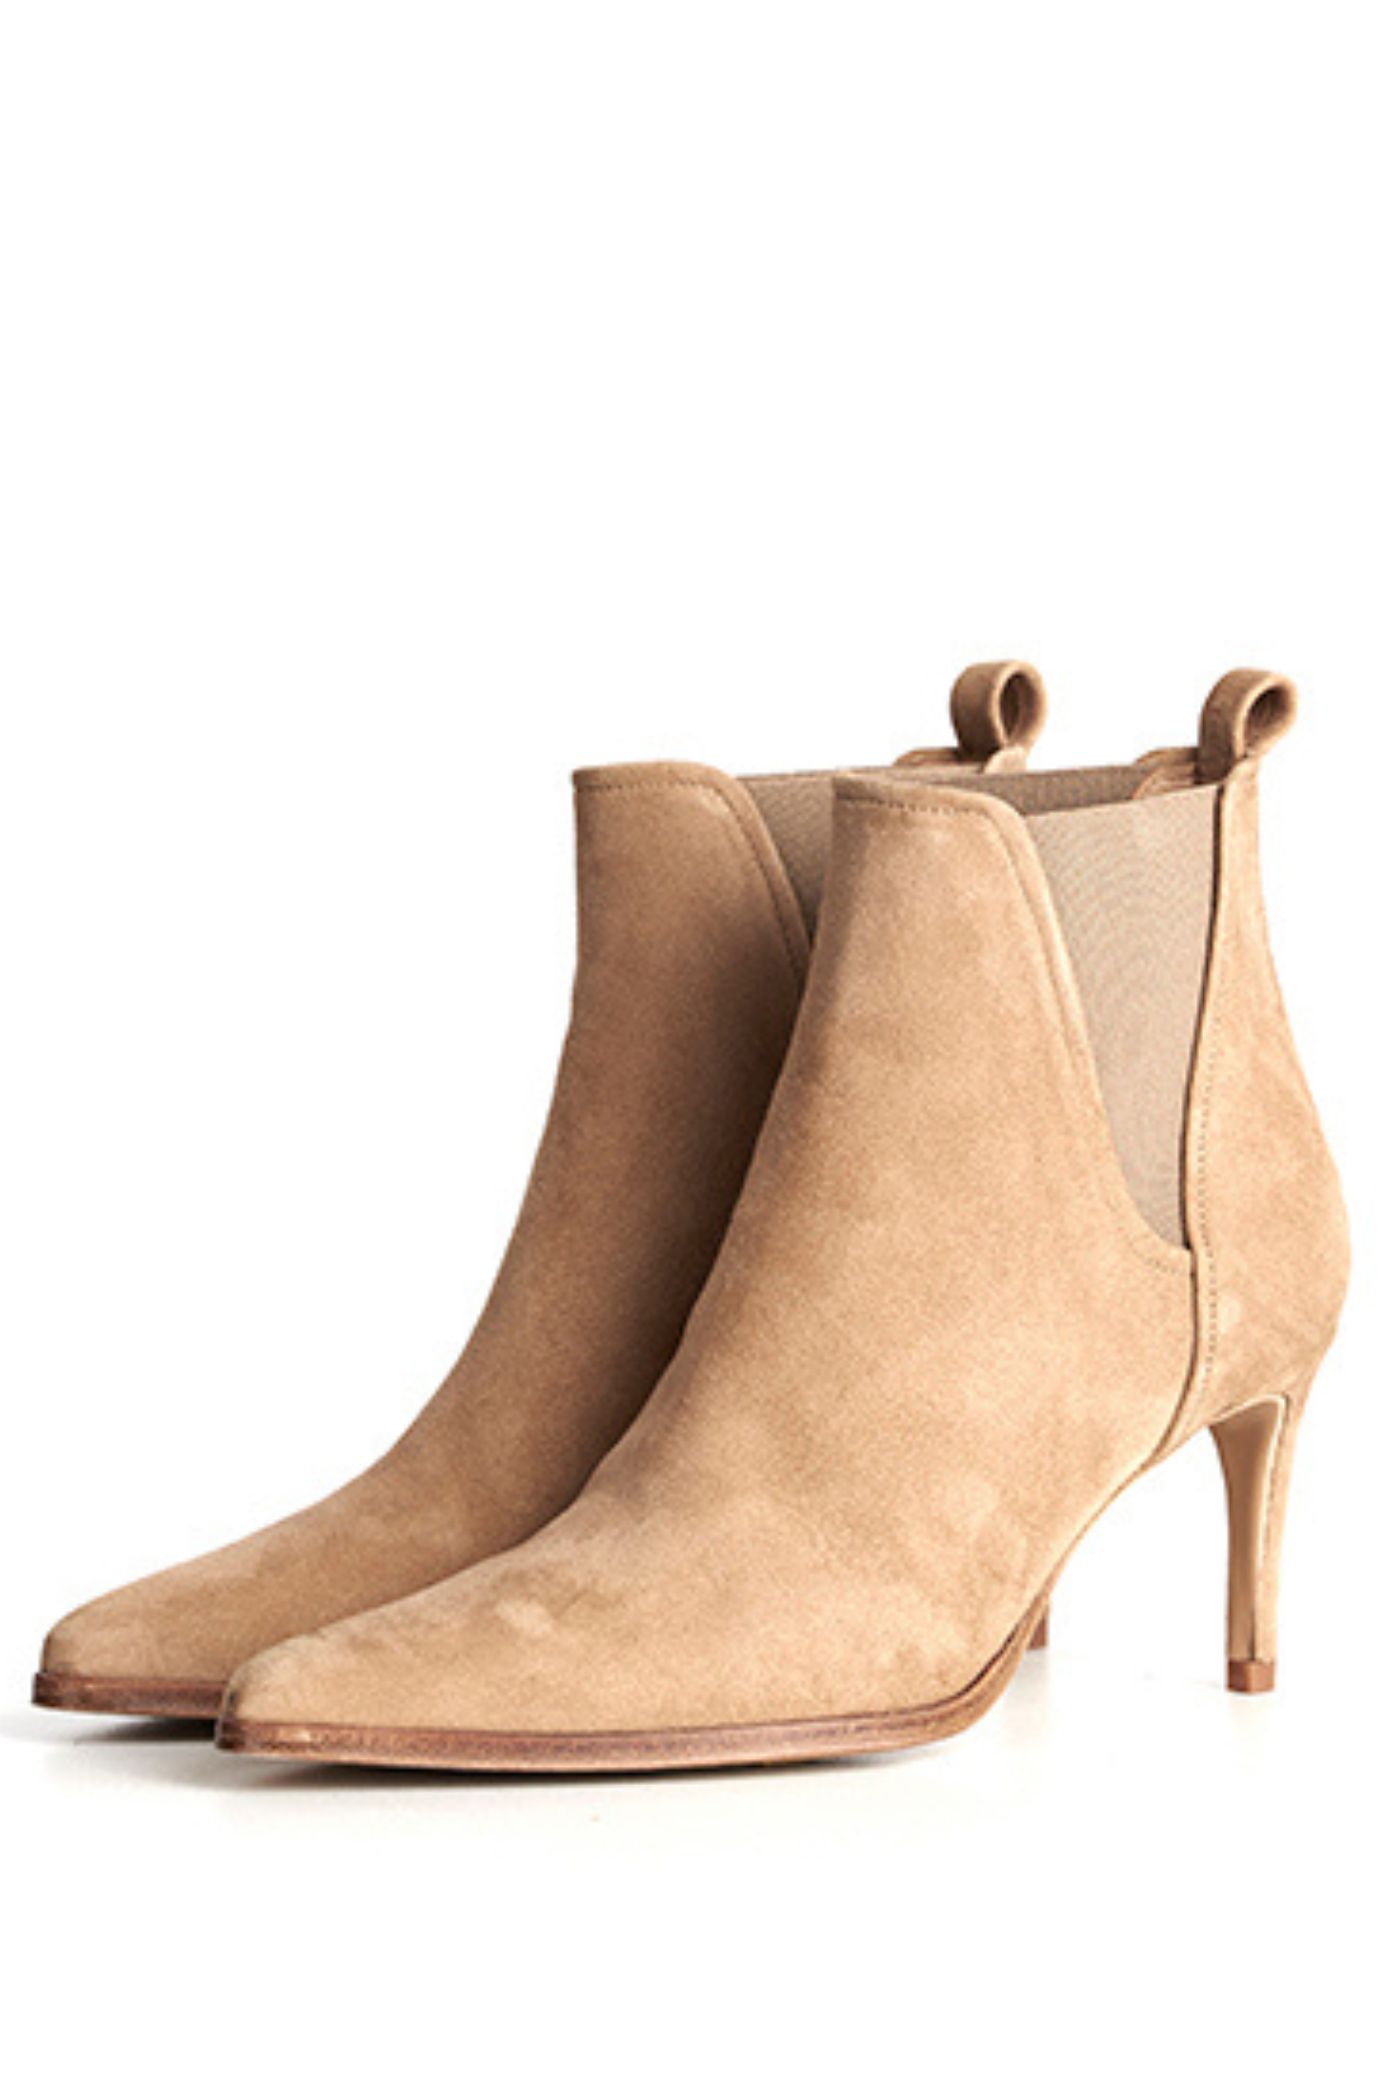 Boots Fey Camel